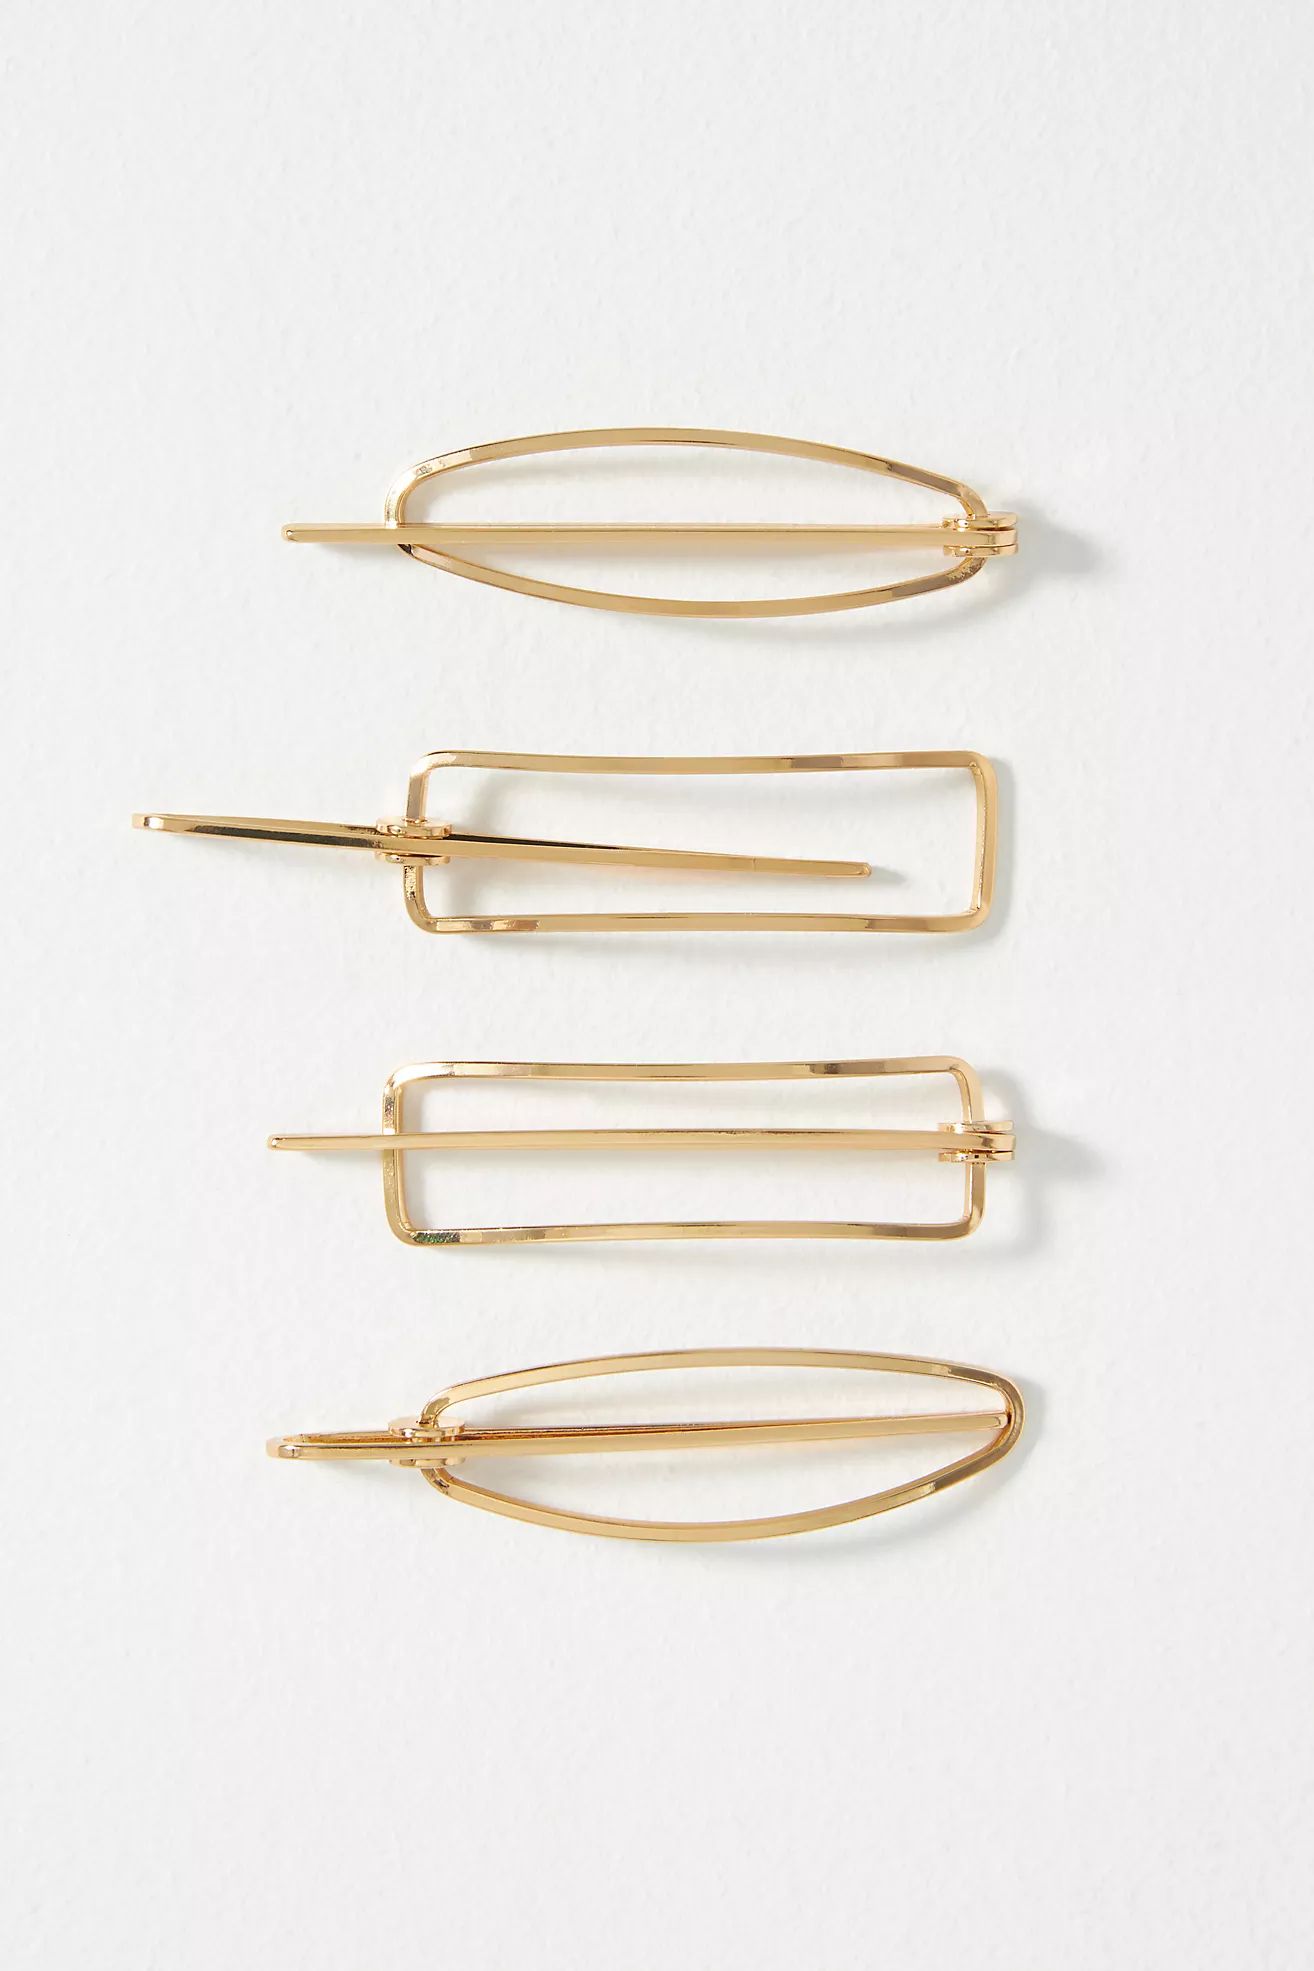 By Anthropologie Clubhouse Barrettes, Set of 4 | Anthropologie (US)